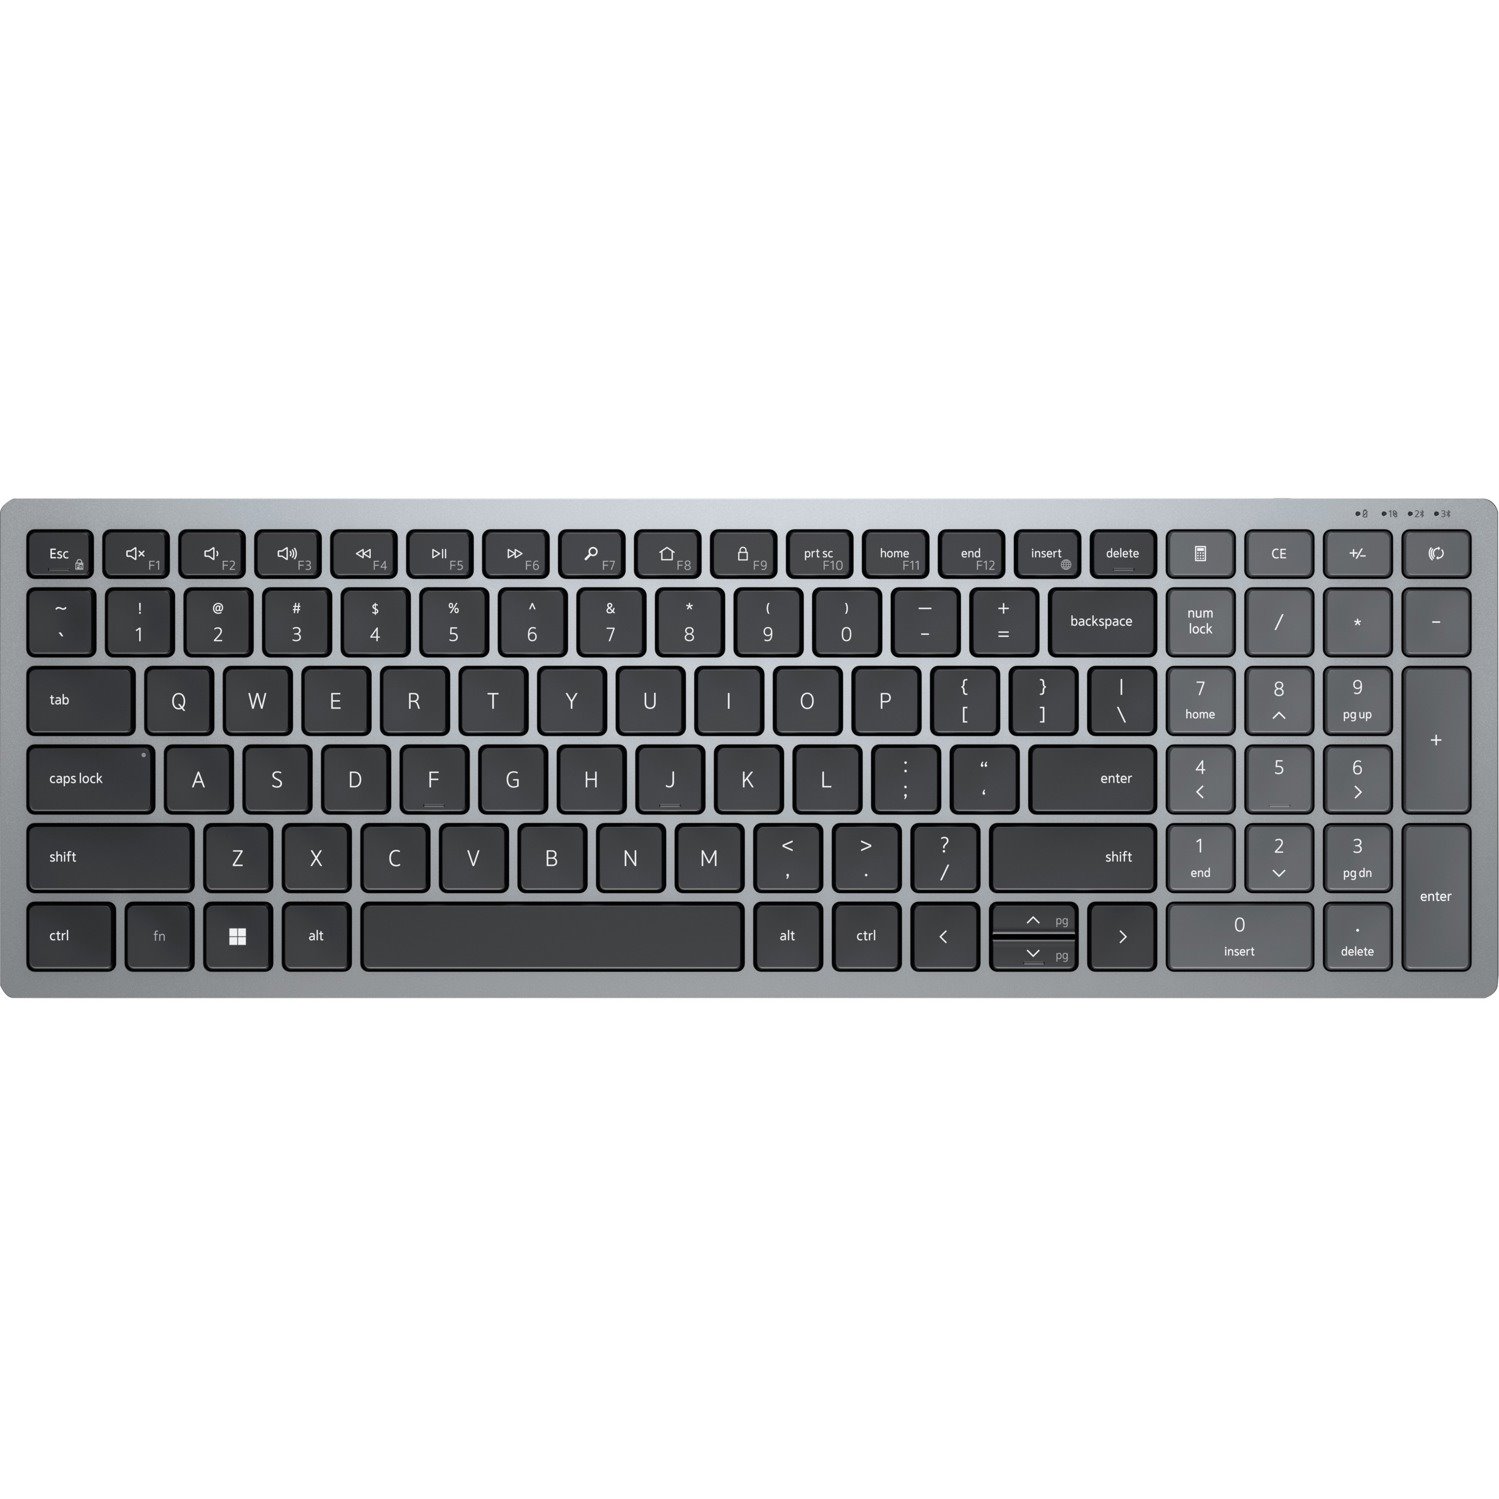 Dell Compact KB740 Keyboard - Wireless Connectivity - English (US) - QWERTY Layout - Titan Gray